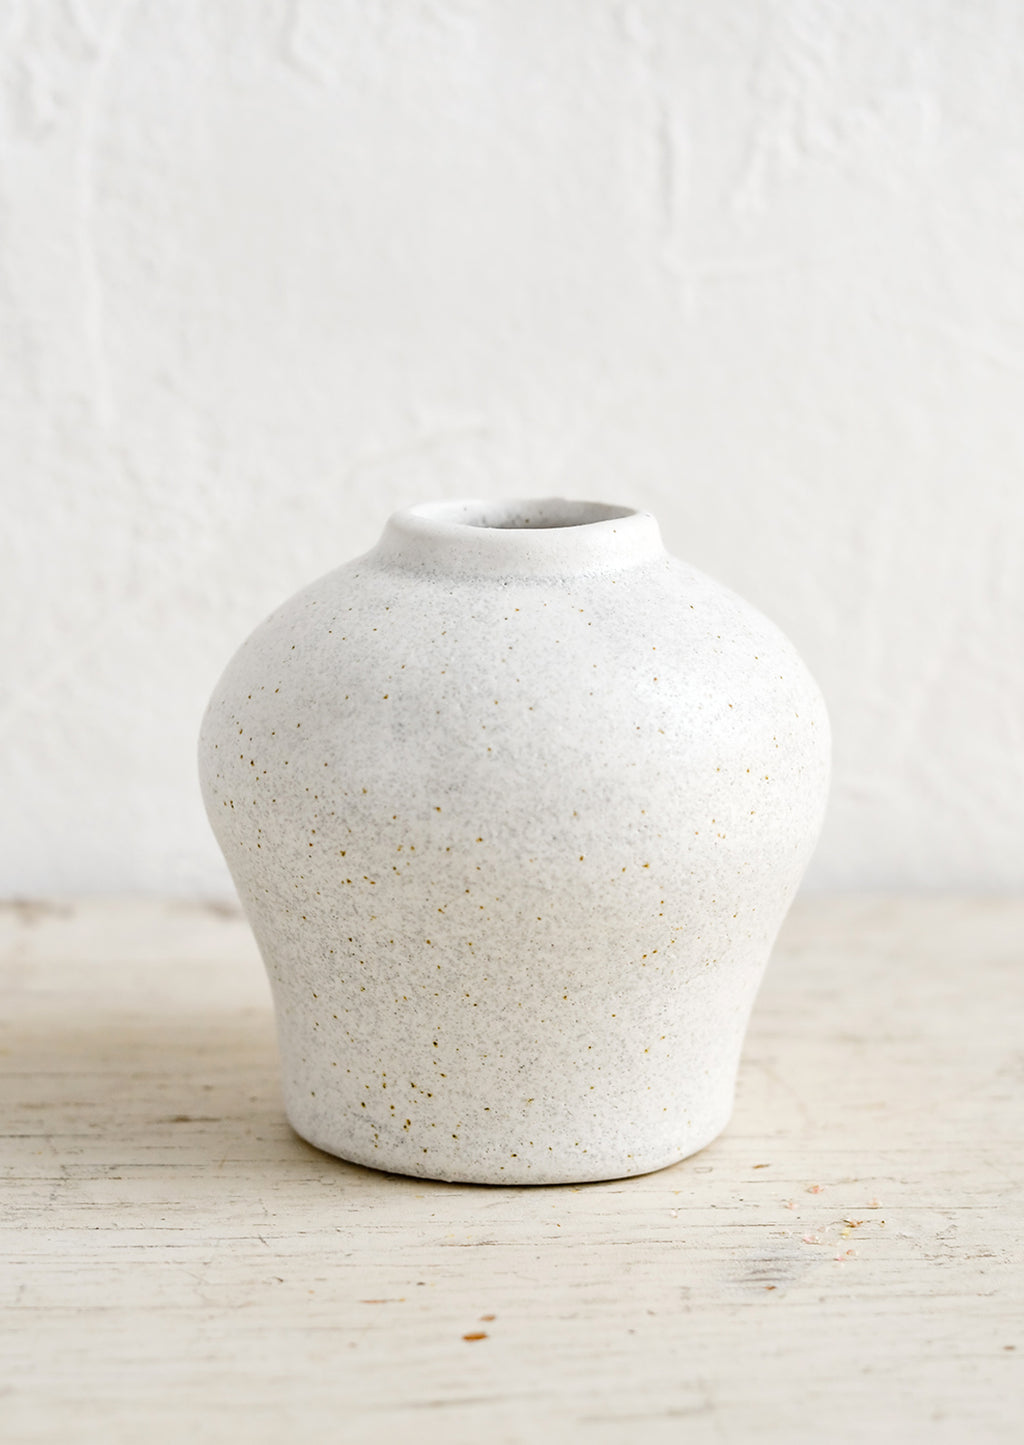 1: A small white ceramic vase in an urn-like shape.